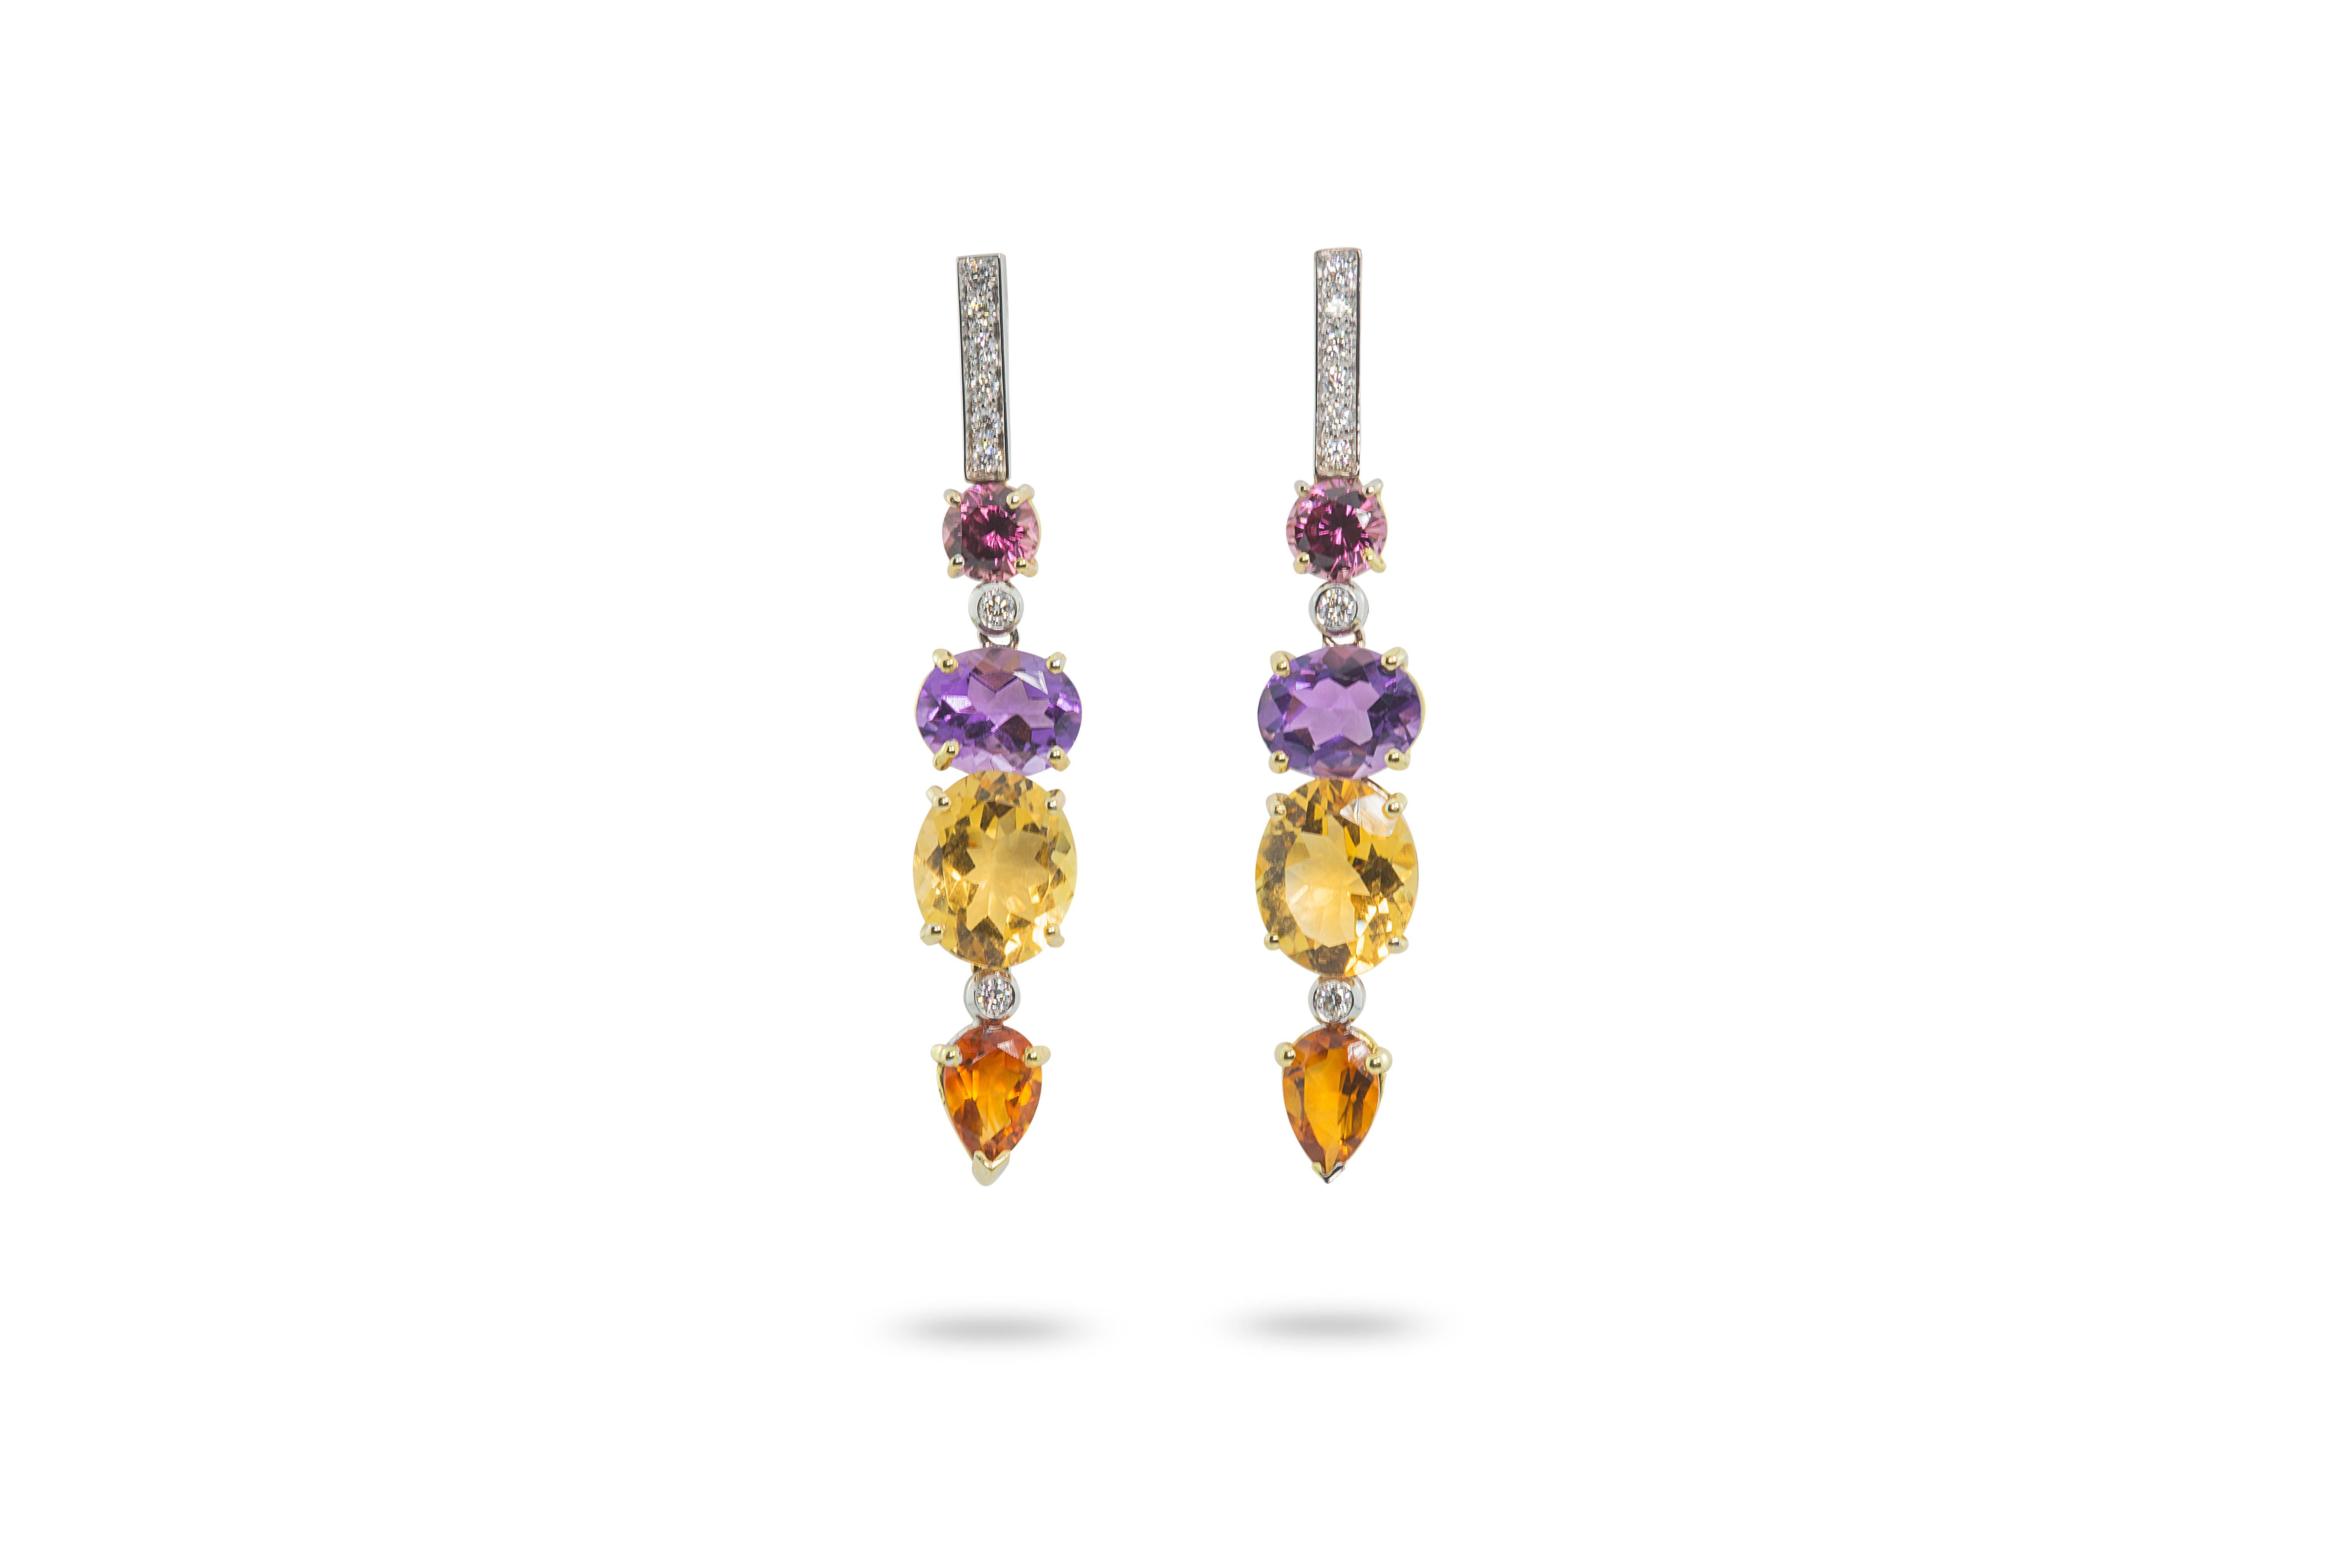 Rossella Ugolini Design Collection 18 Karat Gold 0.44 Karat White Diamonds Amethyst Citrine Earrings
This Sunshine earrings, shine with their own light: the particular cut of the surface of the gems of which they are composed shines under the rays